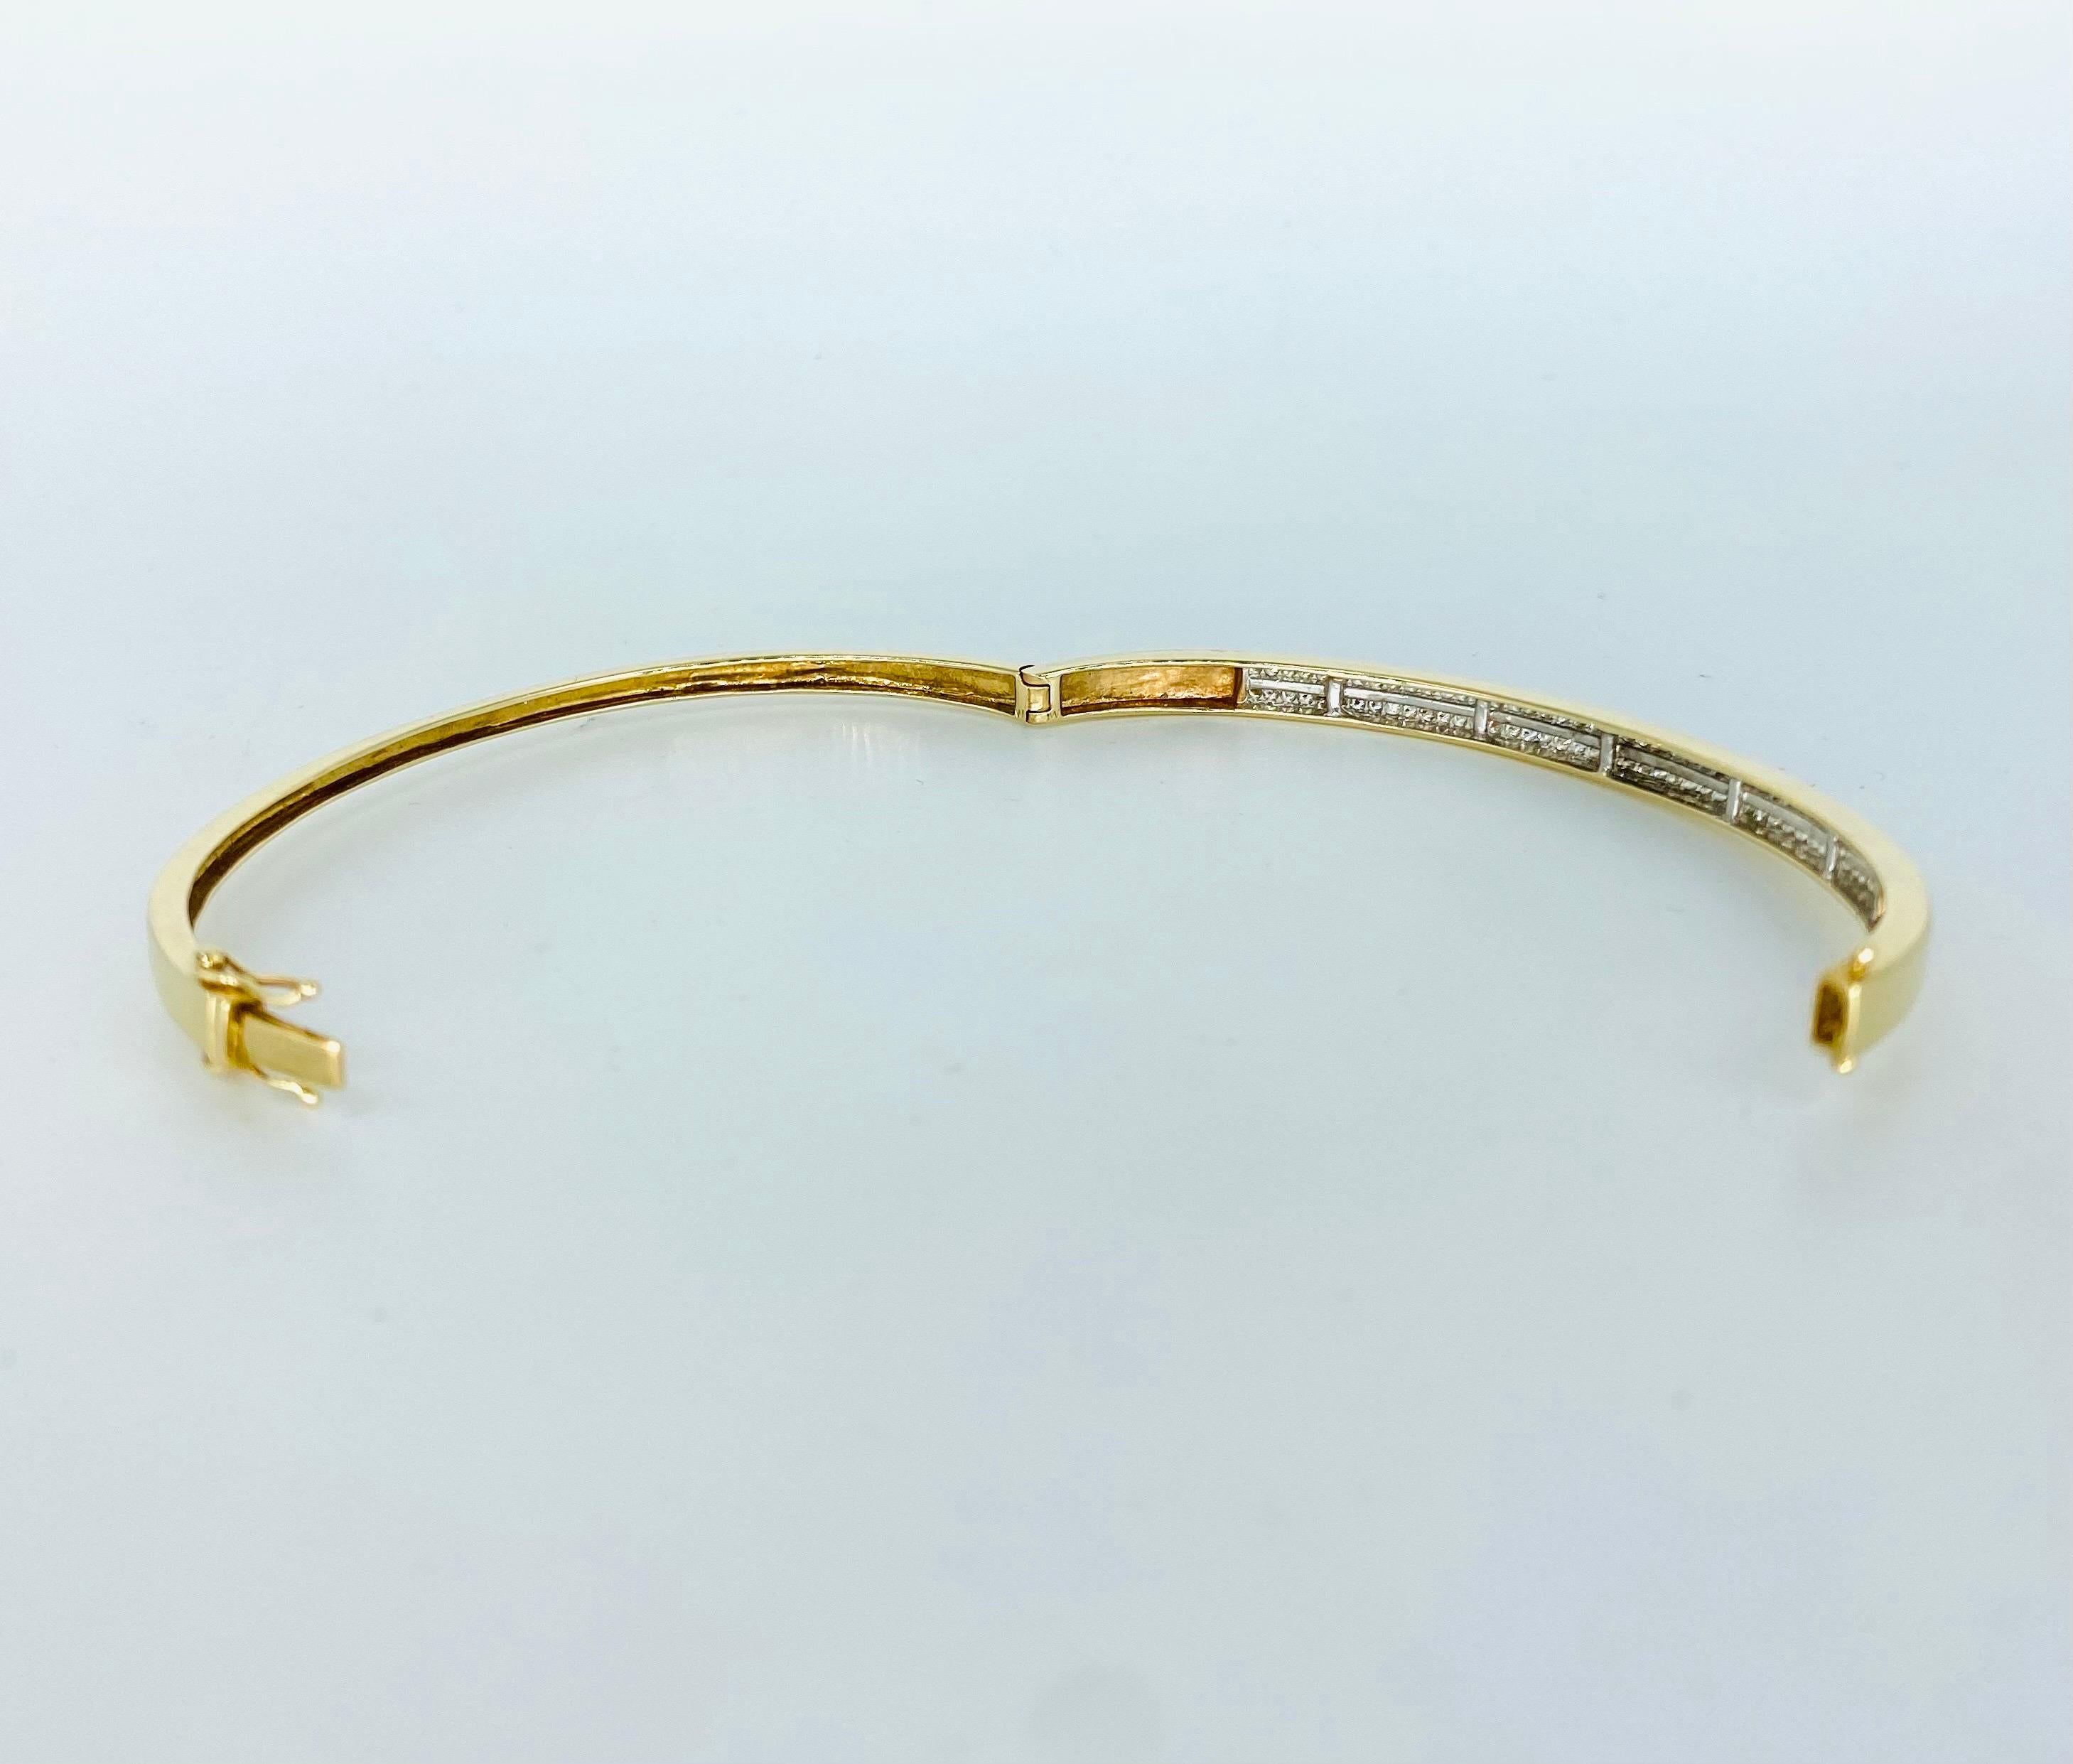 Vintage 1.75 Carat Two-Row Champagne Diamonds Bangle 14k Gold In Excellent Condition For Sale In Miami, FL